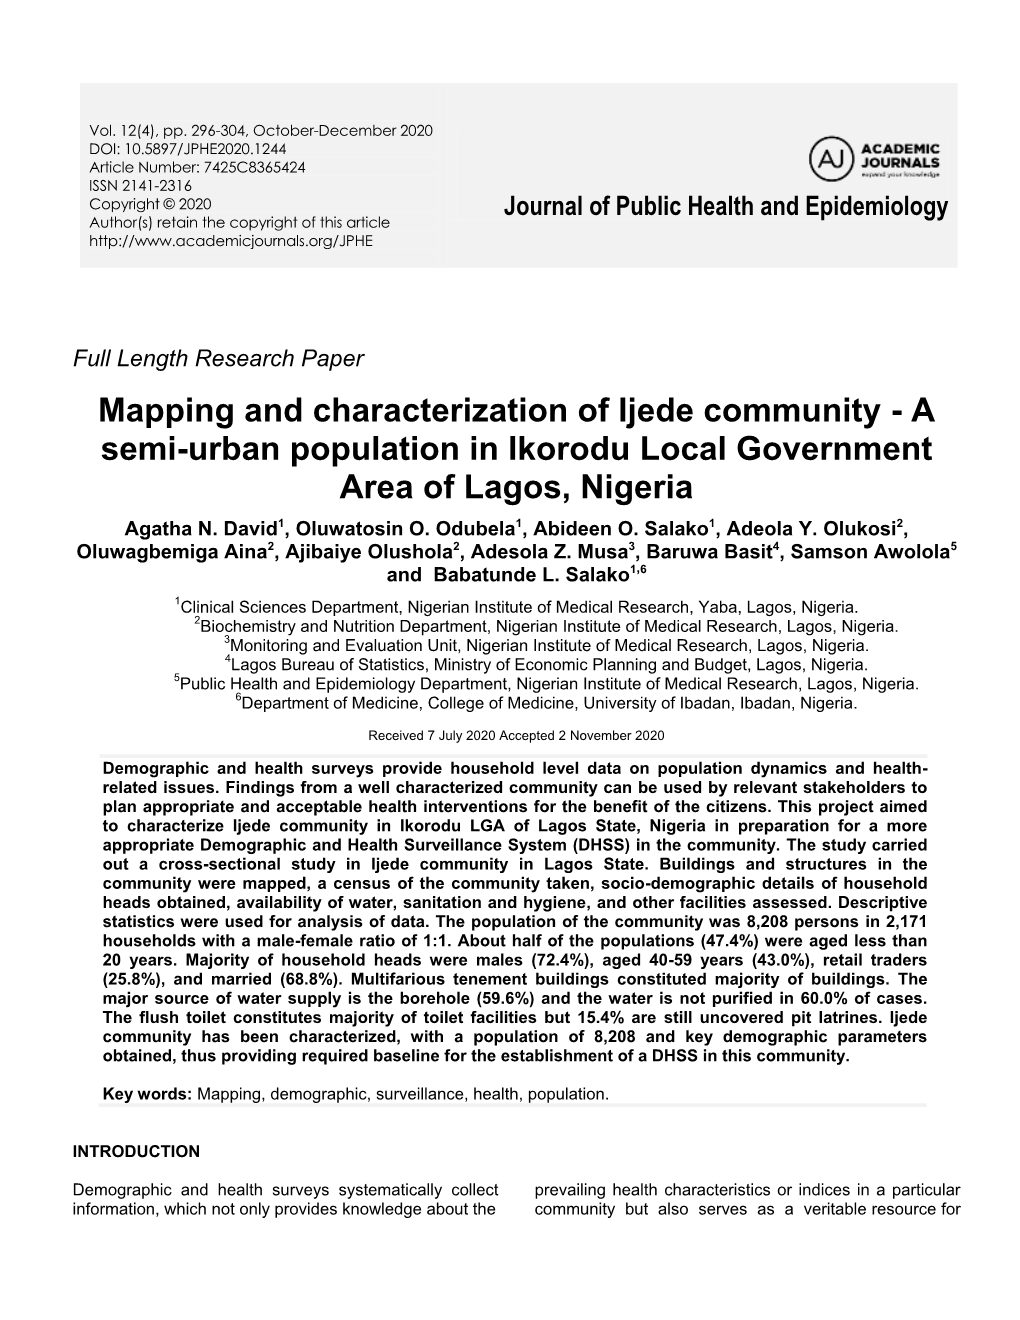 Mapping and Characterization of Ijede Community - a Semi-Urban Population in Ikorodu Local Government Area of Lagos, Nigeria